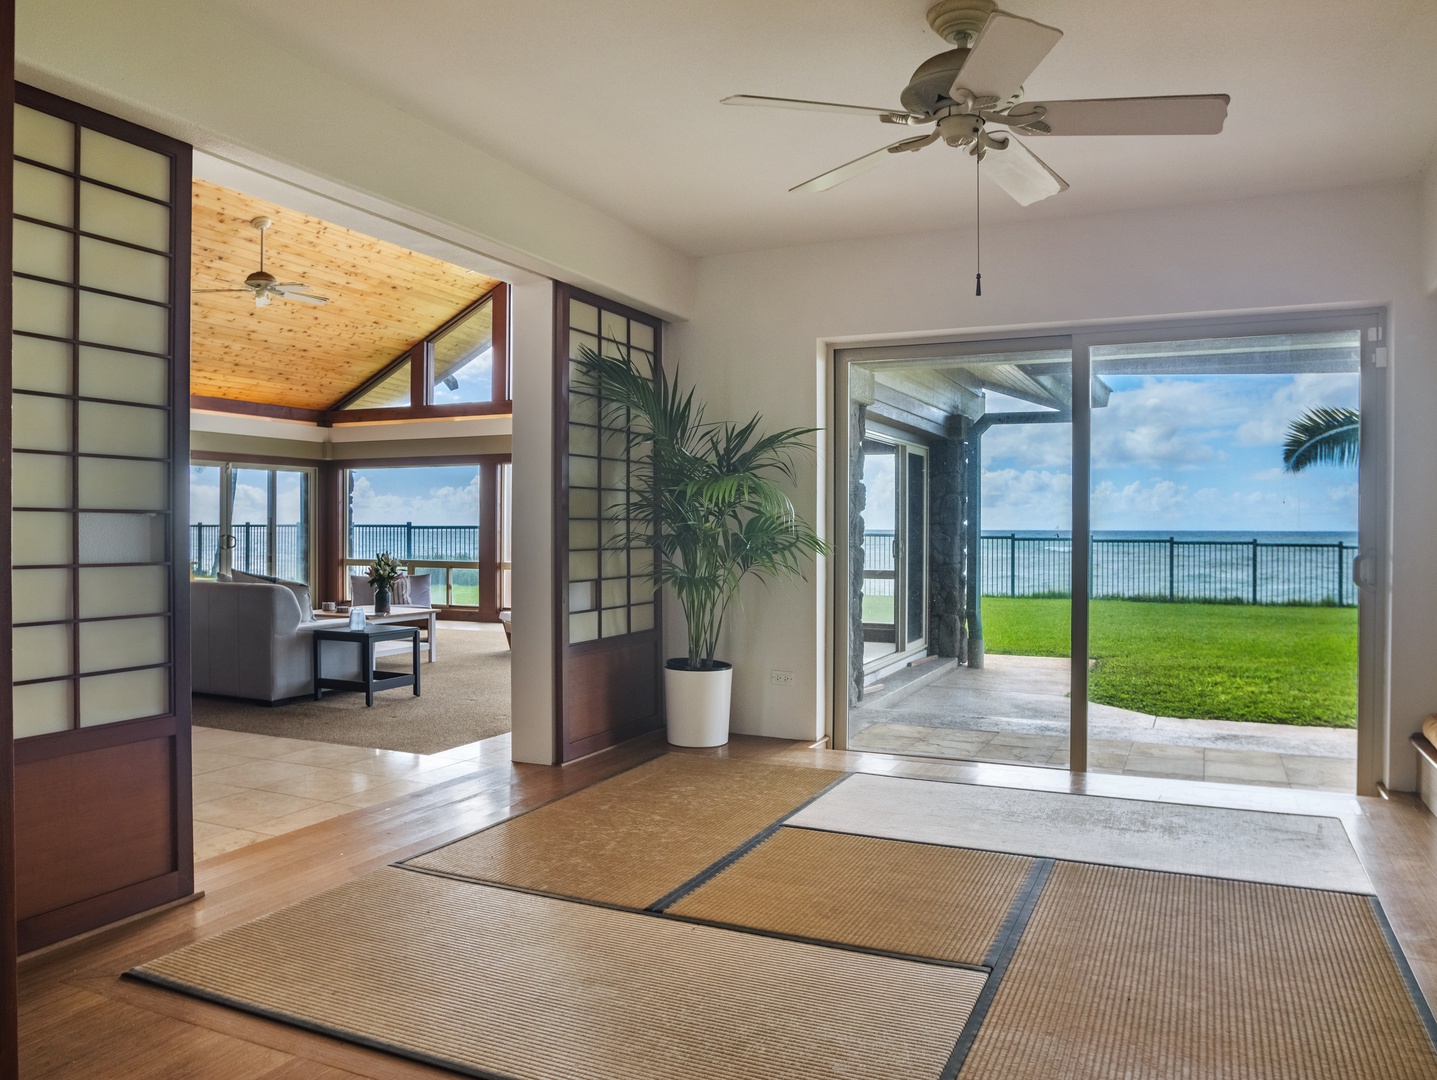 Waianae Vacation Rentals, Konishiki Beachhouse - Open sliding doors invite you to a seamless indoor-outdoor living experience with ocean views.